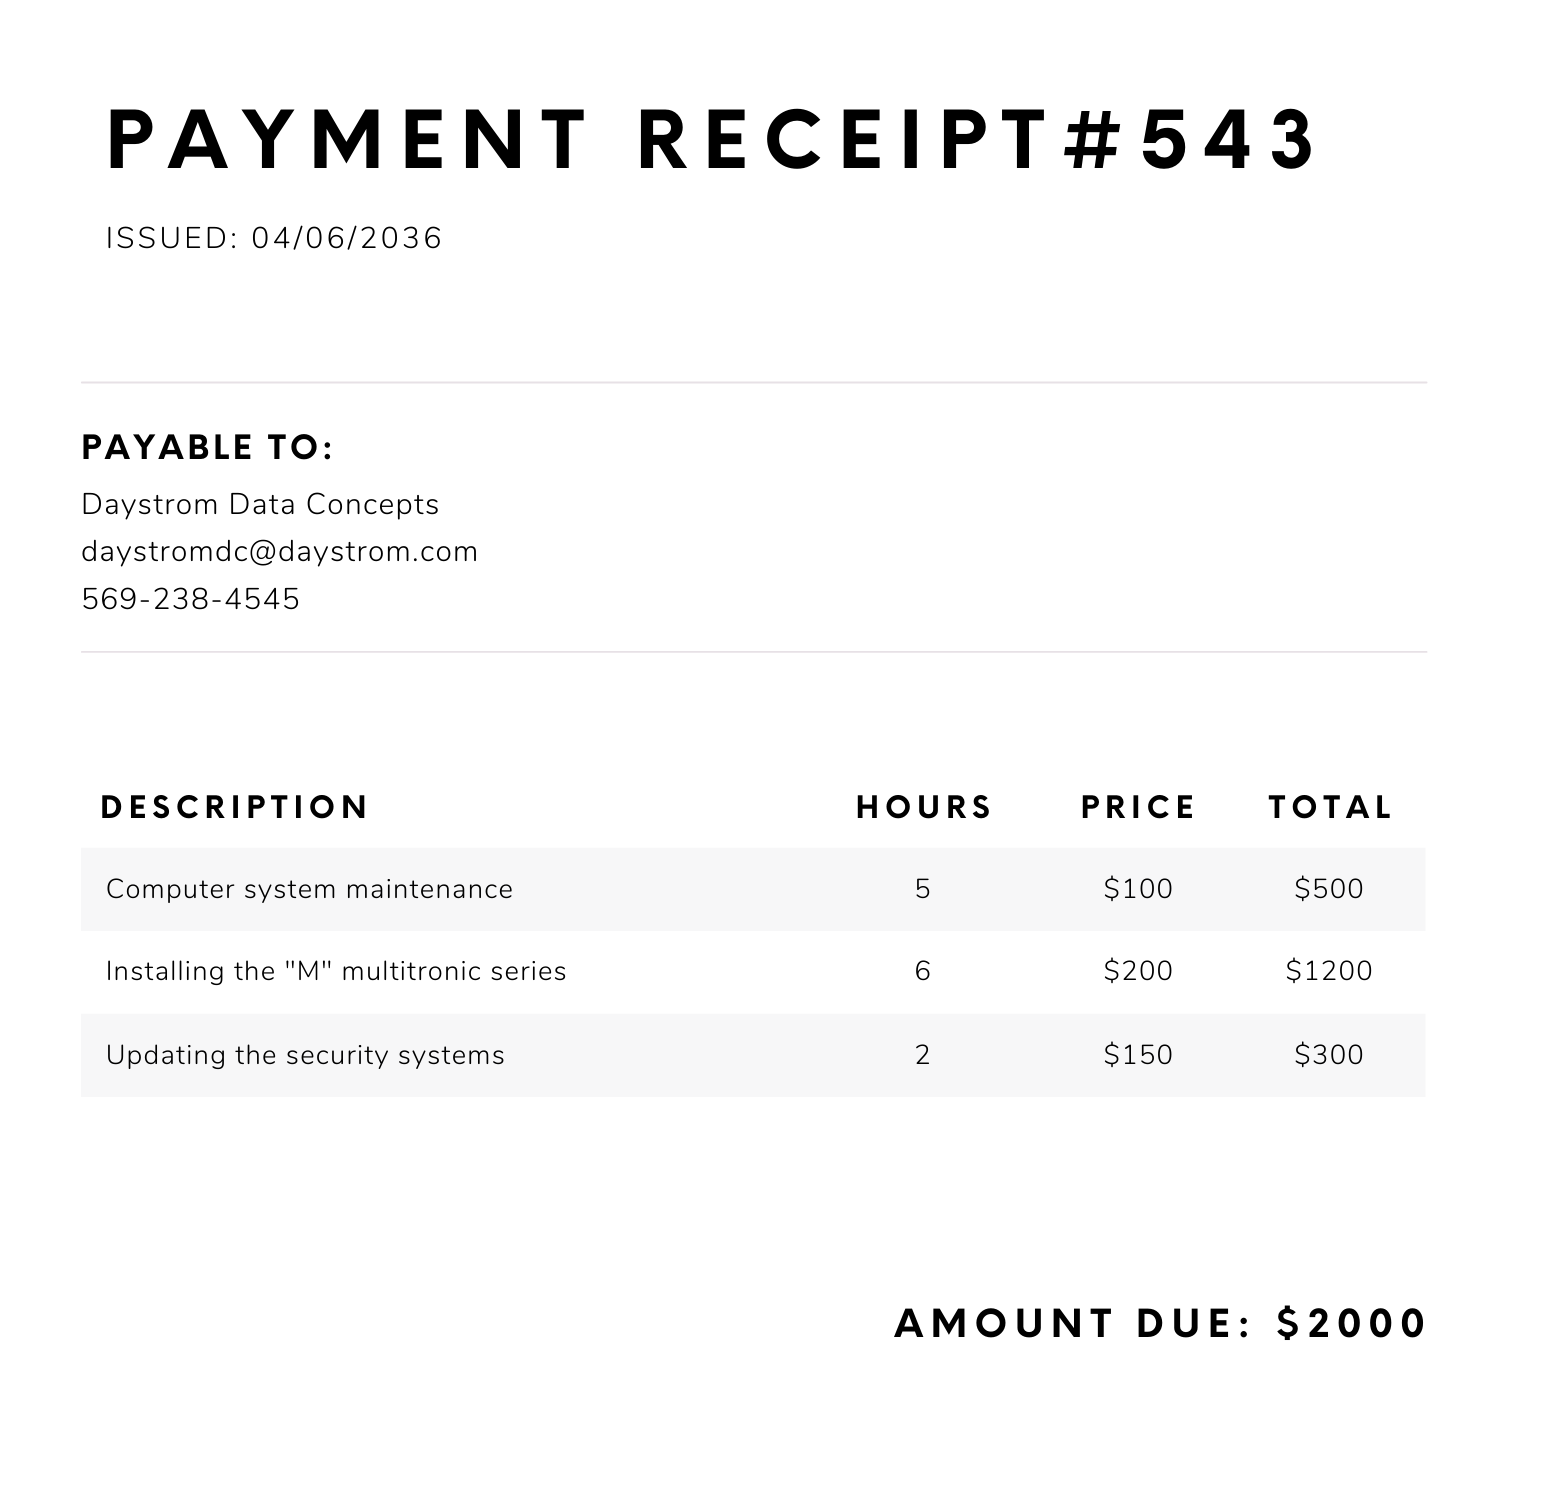 7 Great Receipt of Payment Templates to Use (2022)